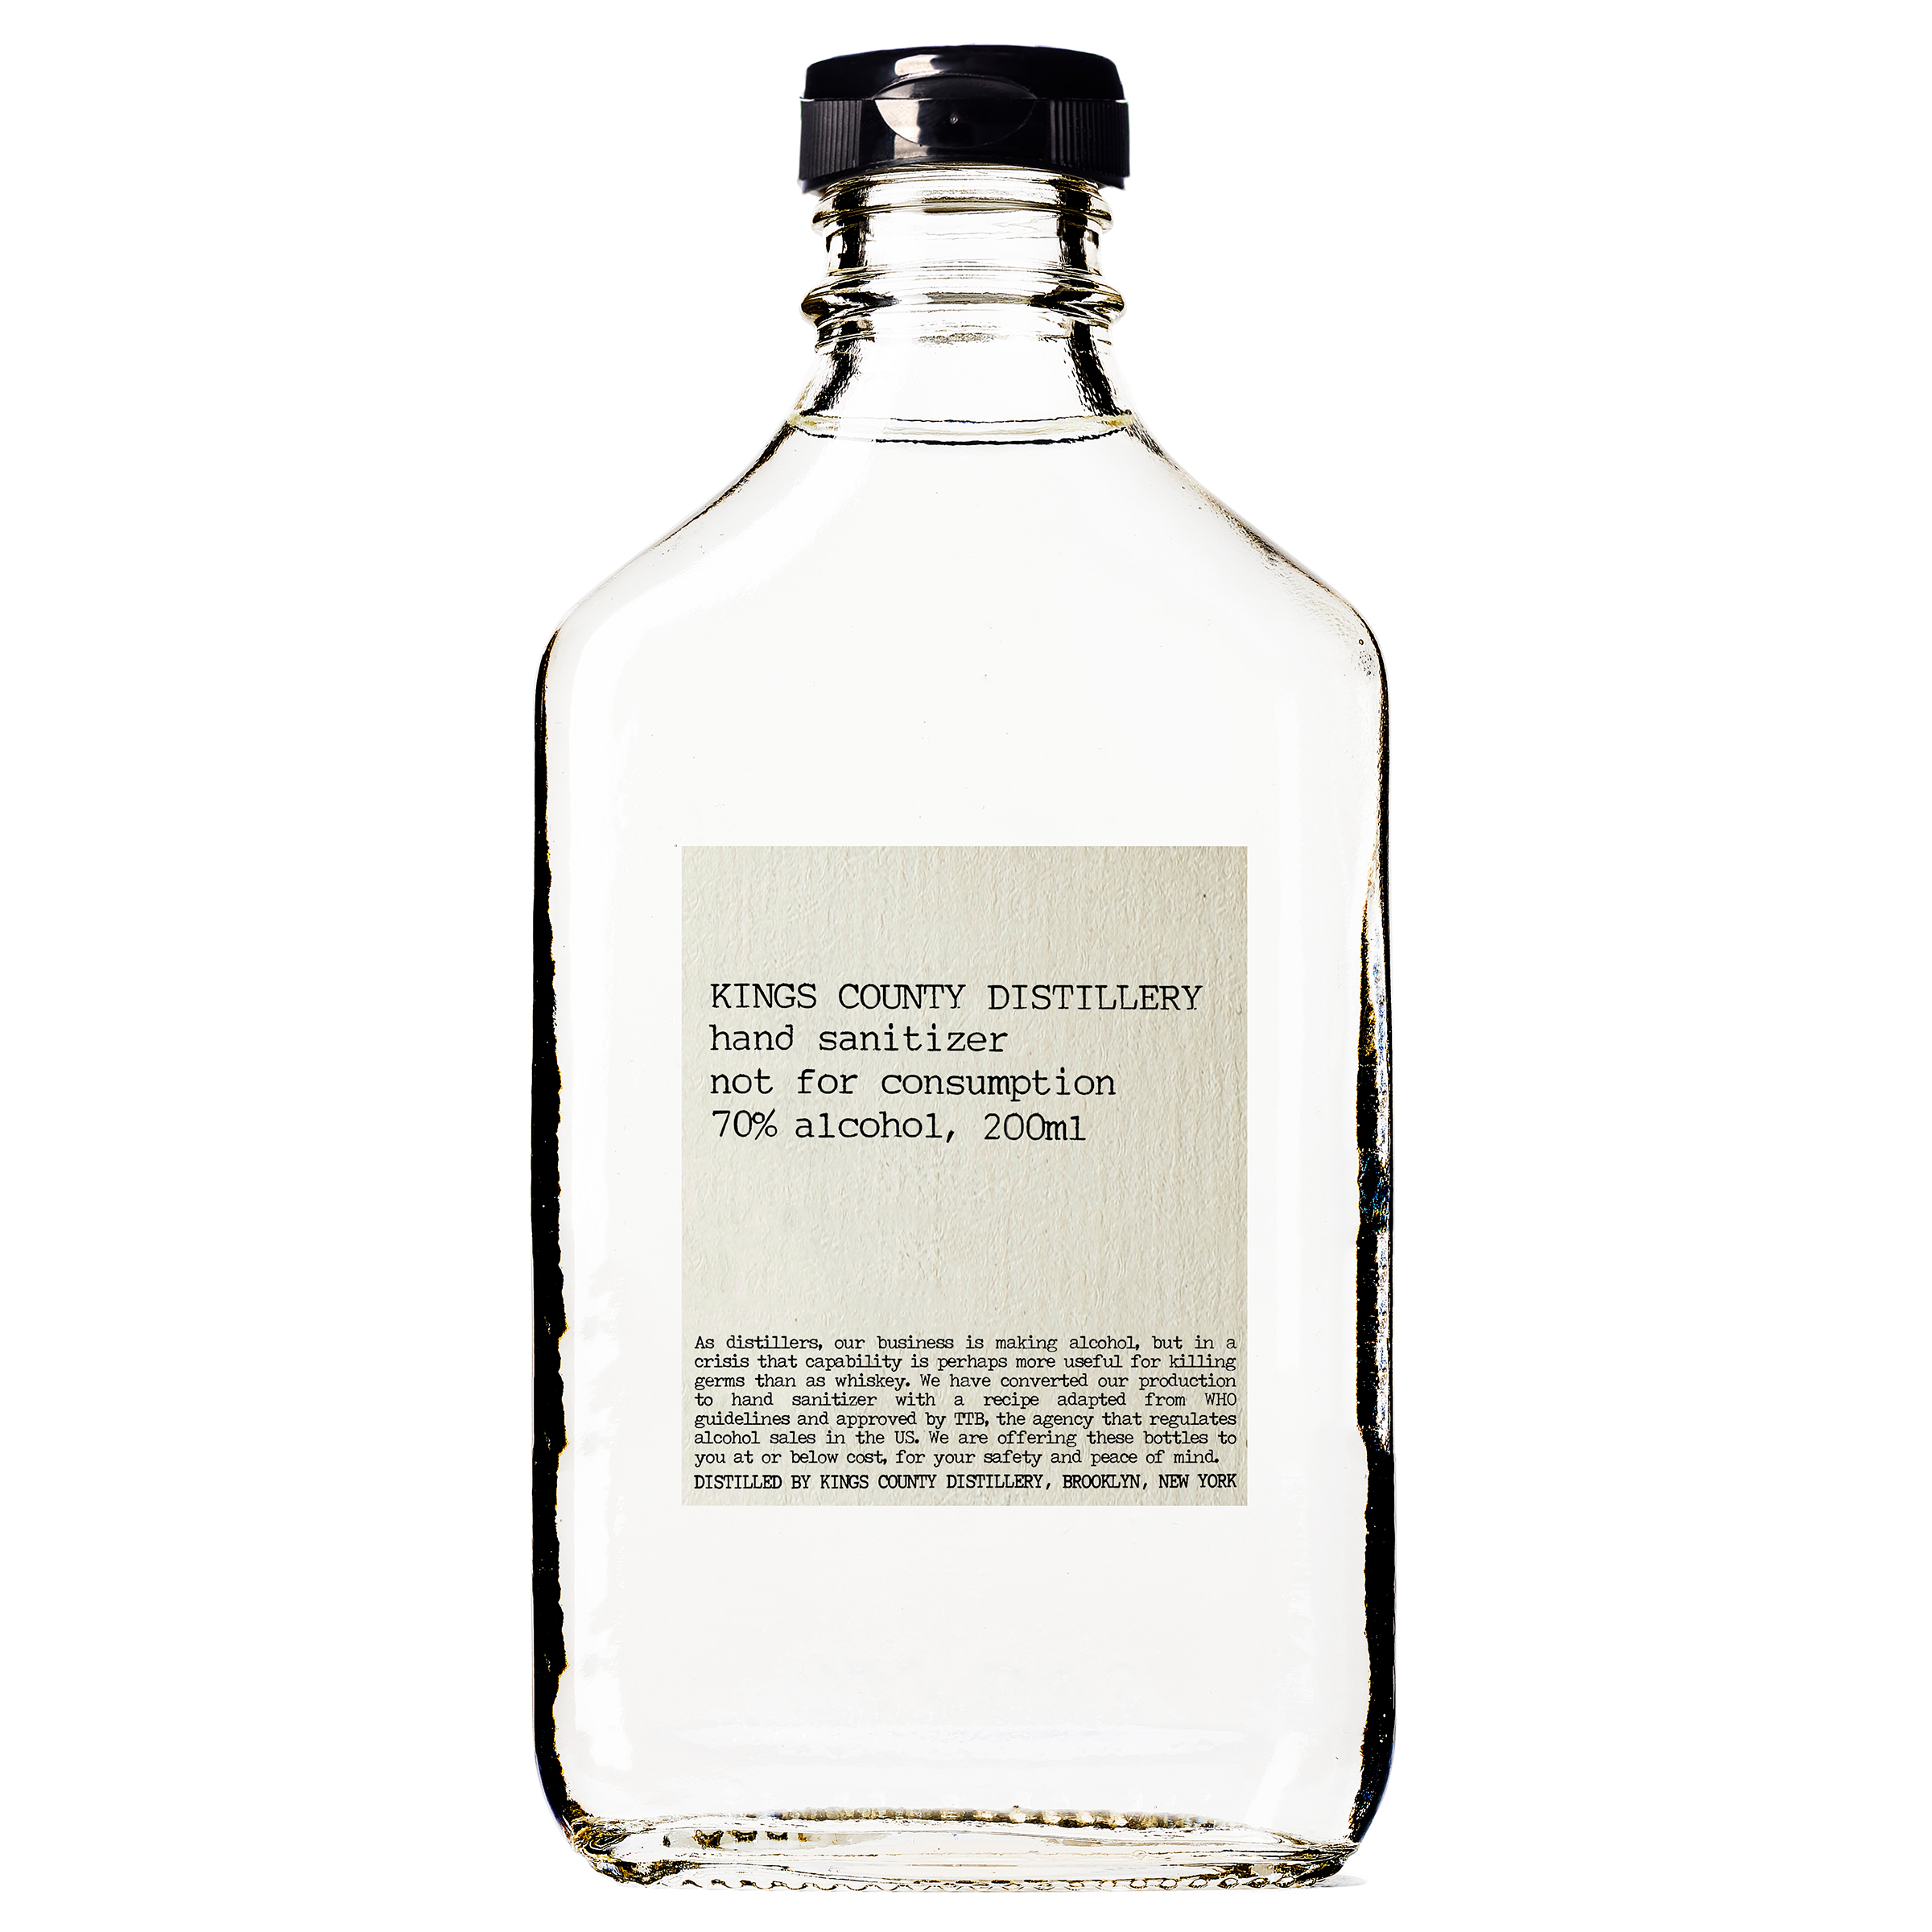 Hand sanitizer made by Kings County Distillery—which usually makes whiskey—in Brooklyn, N.Y. The New-York Historical Society has collected hand sanitizer made by distilleries that converted their operations. (Courtesy Kings County Distillery)